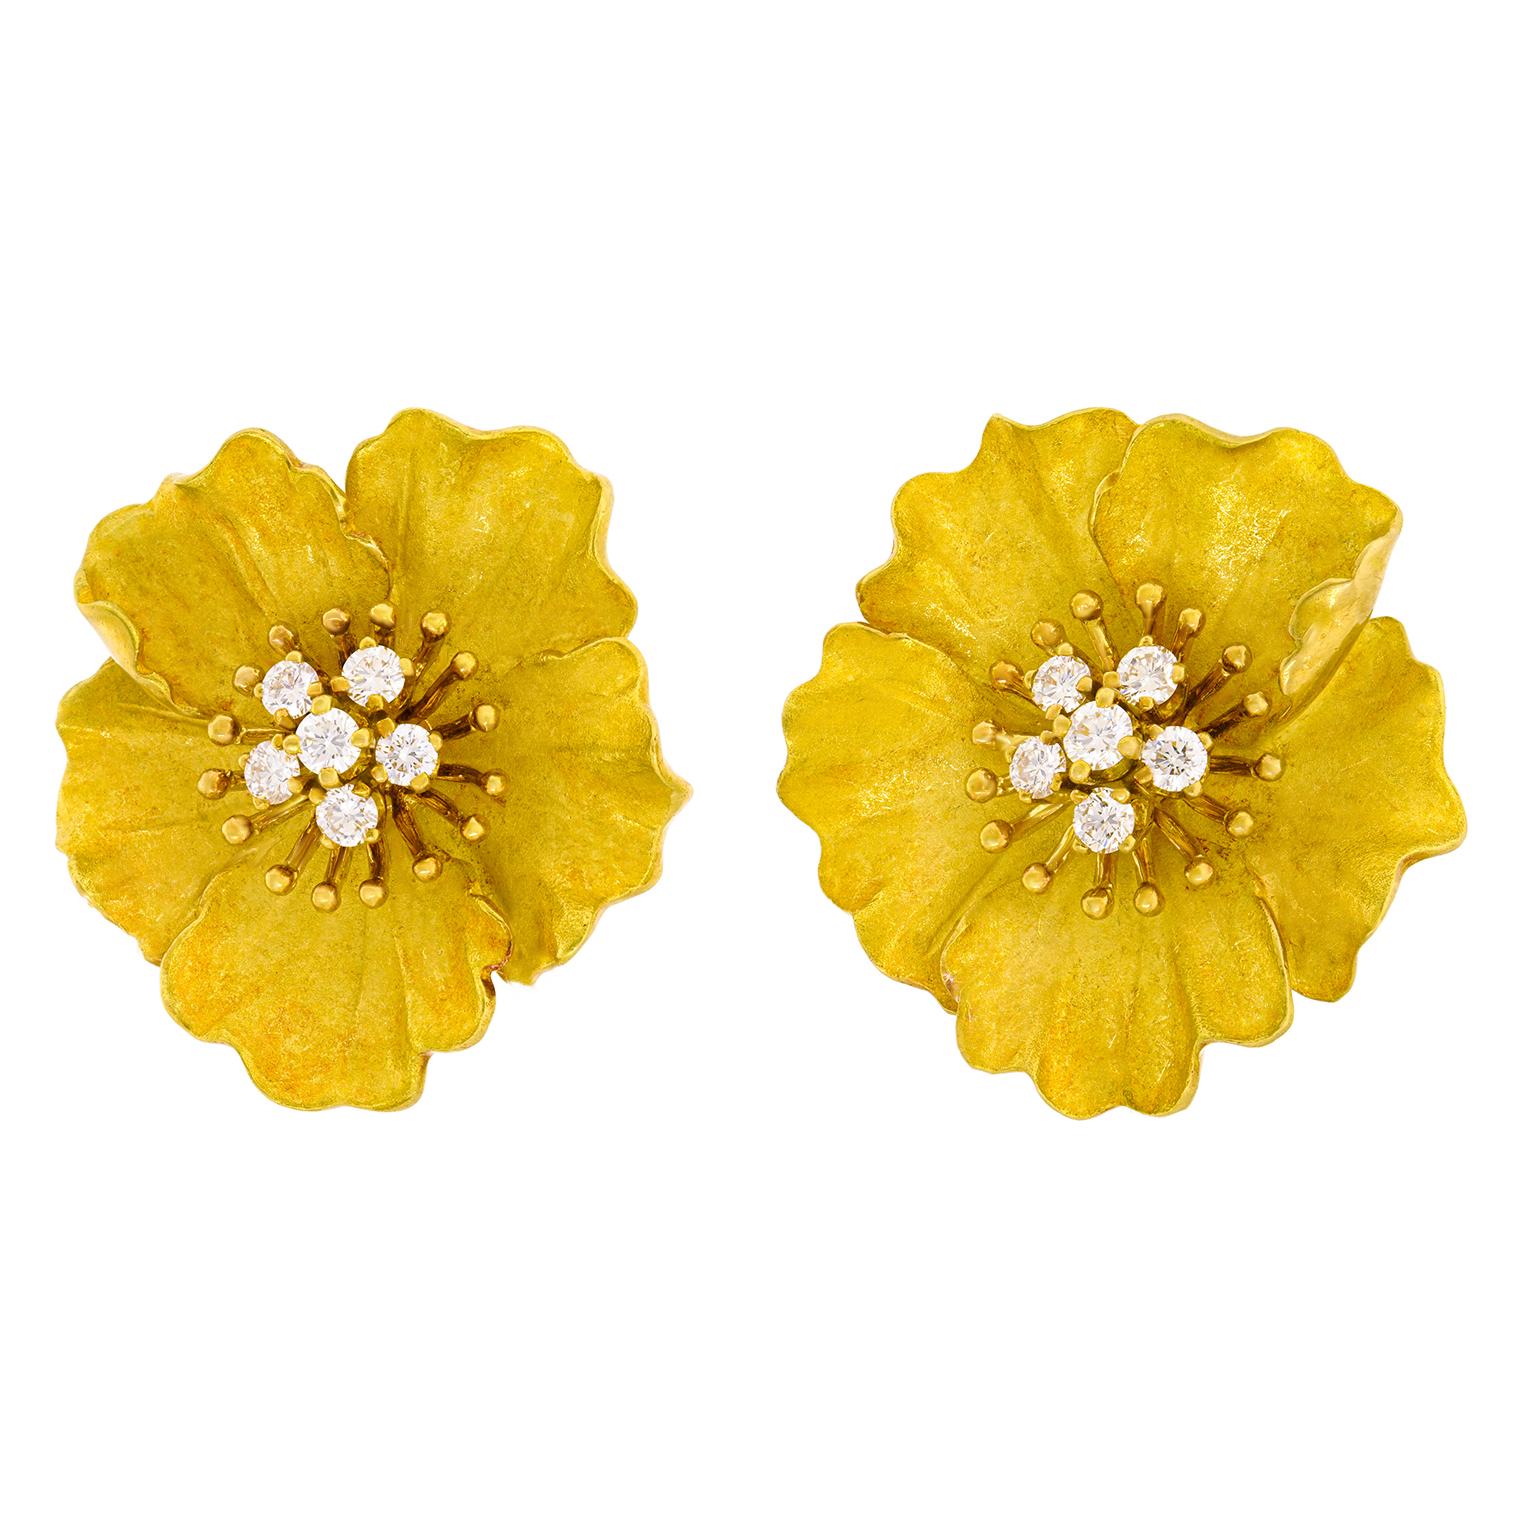 American Perennials Collection Earrings by Tiffany & Co 4